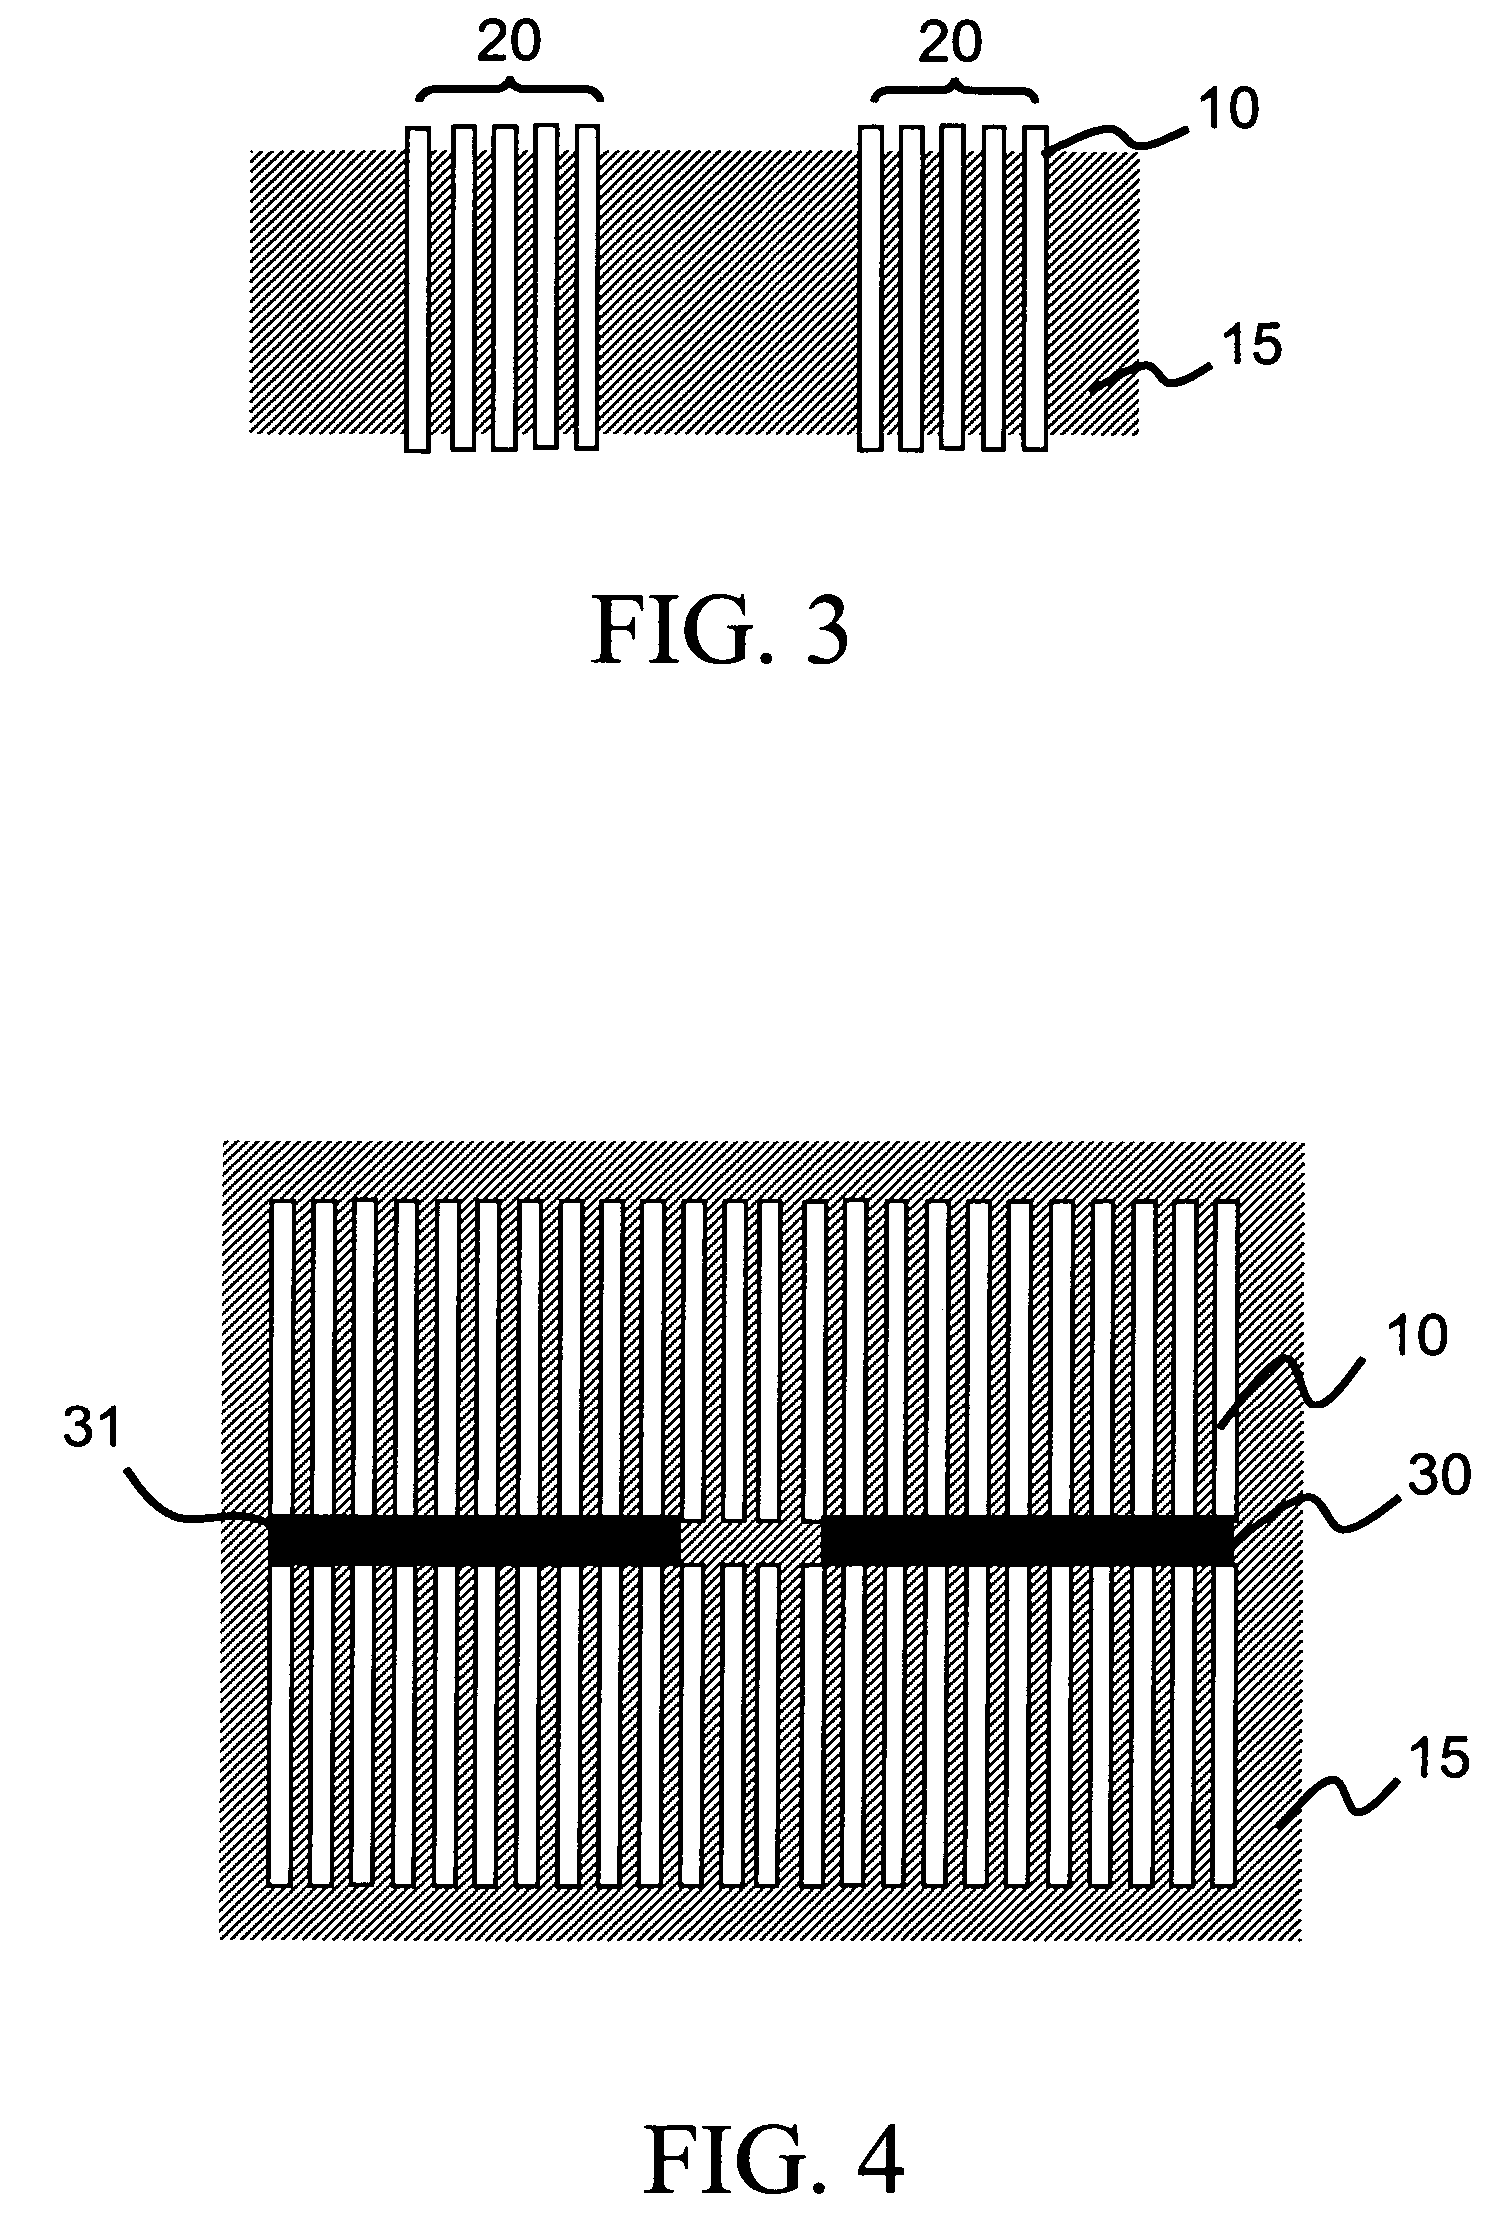 Composite conductive film and semiconductor package using such film